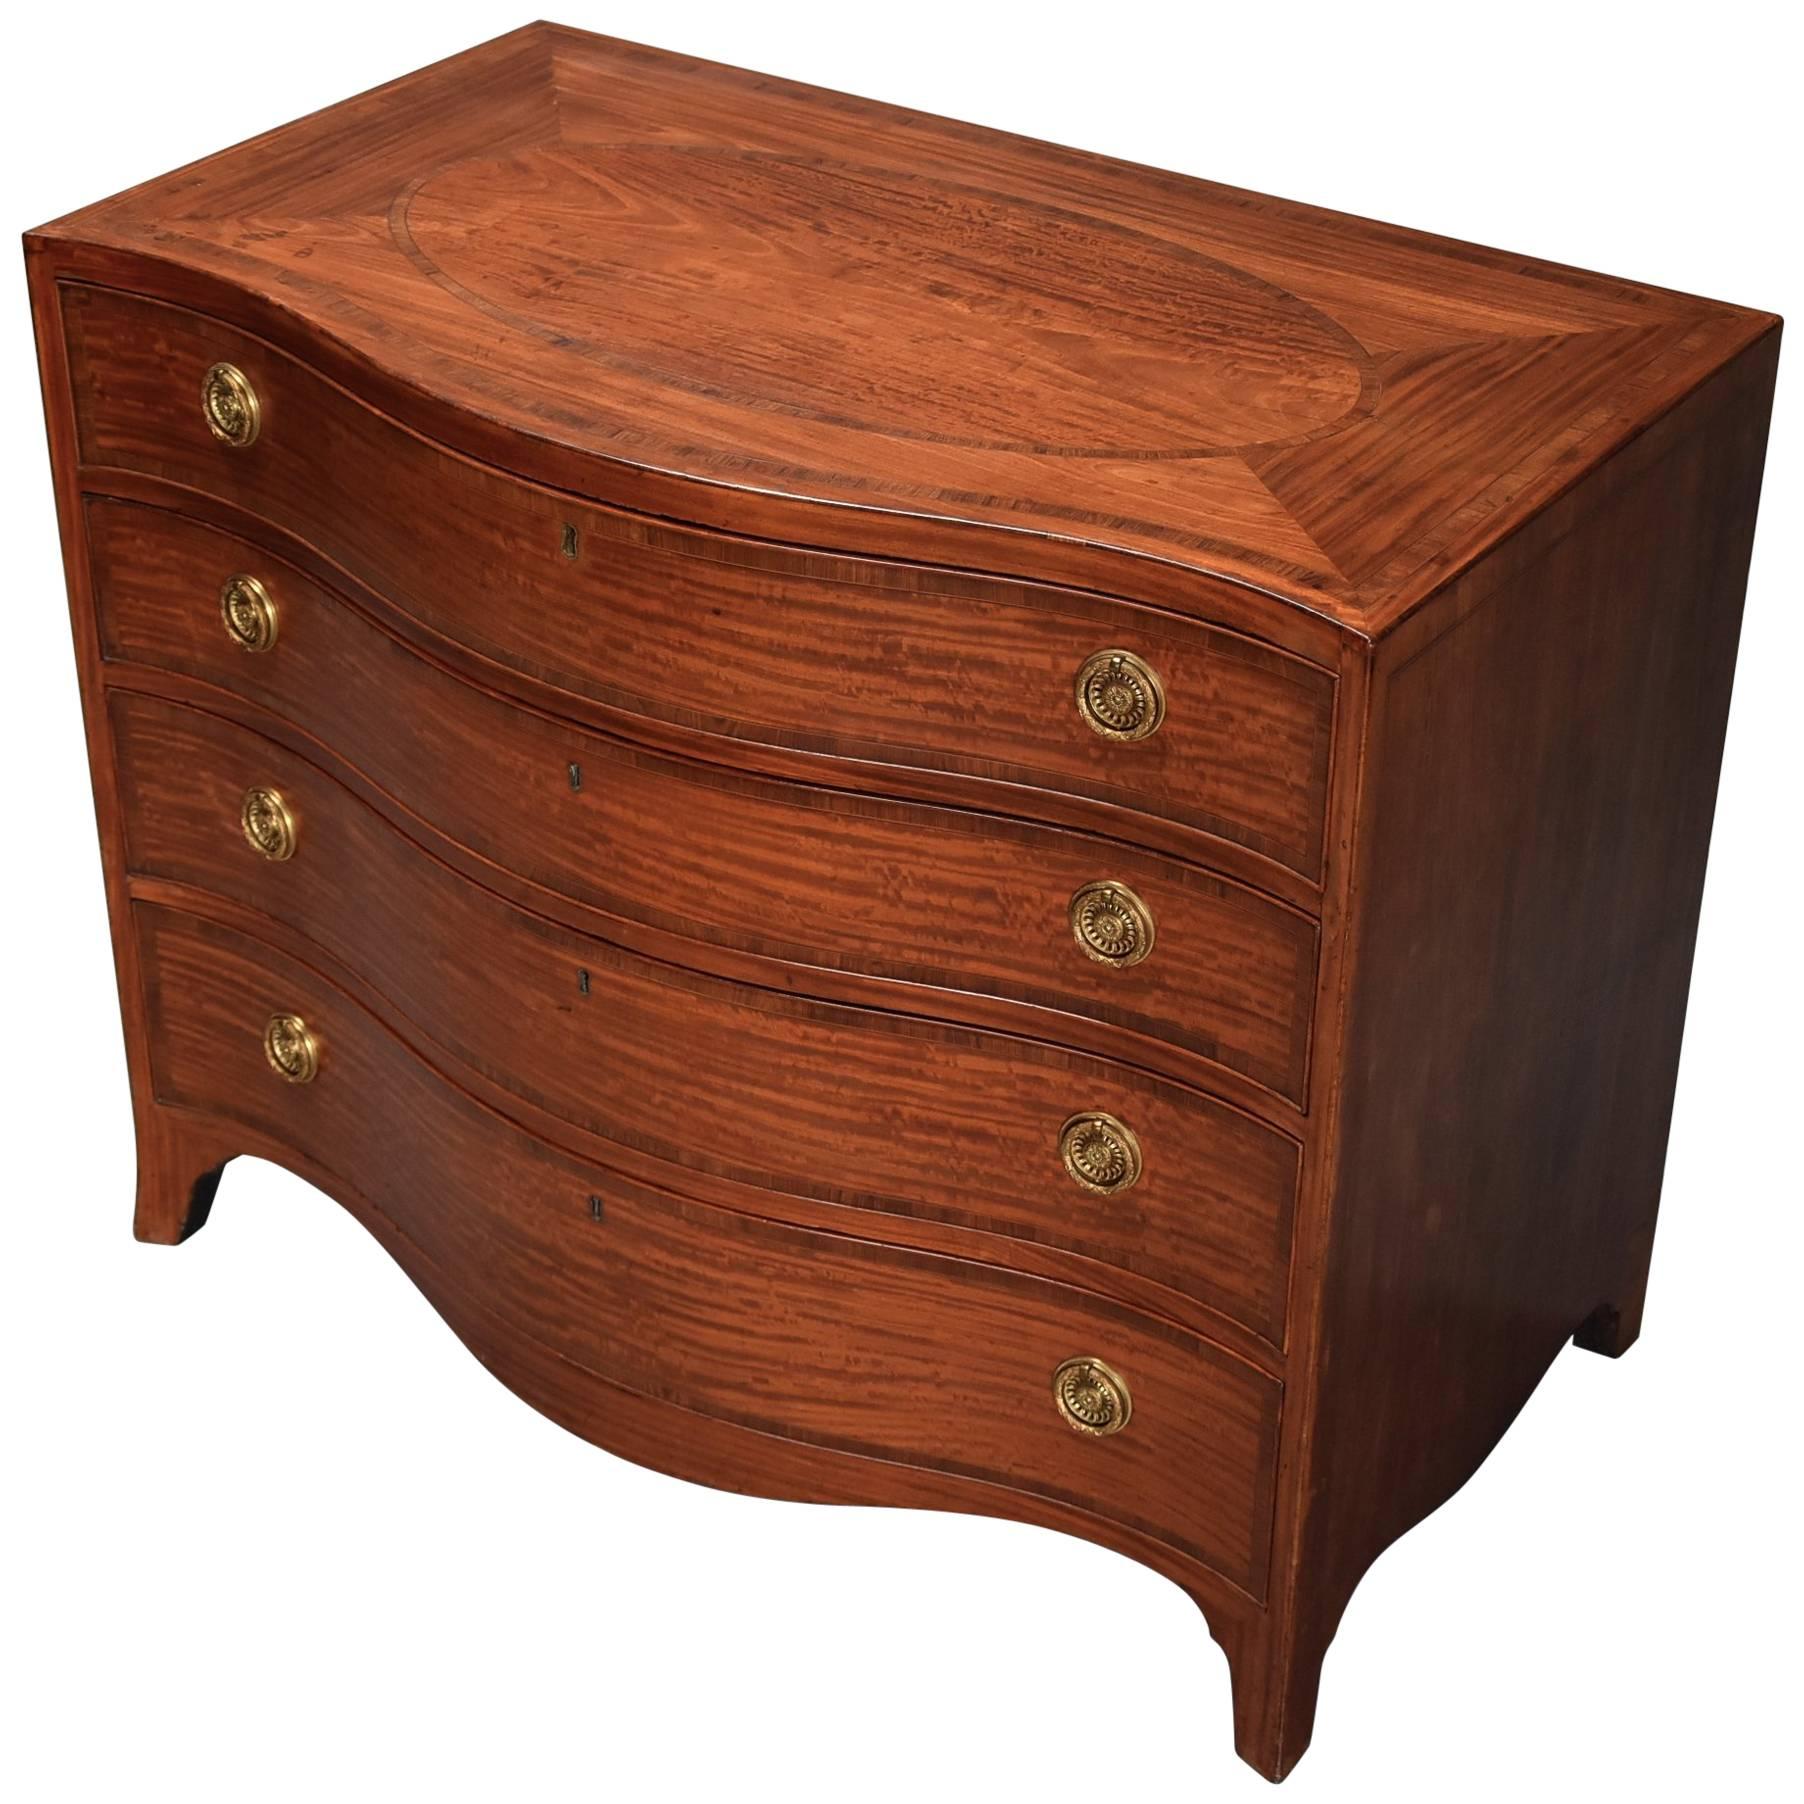 Superb Quality Serpentine Shaped Satinwood Gentleman's Dressing Chest For Sale